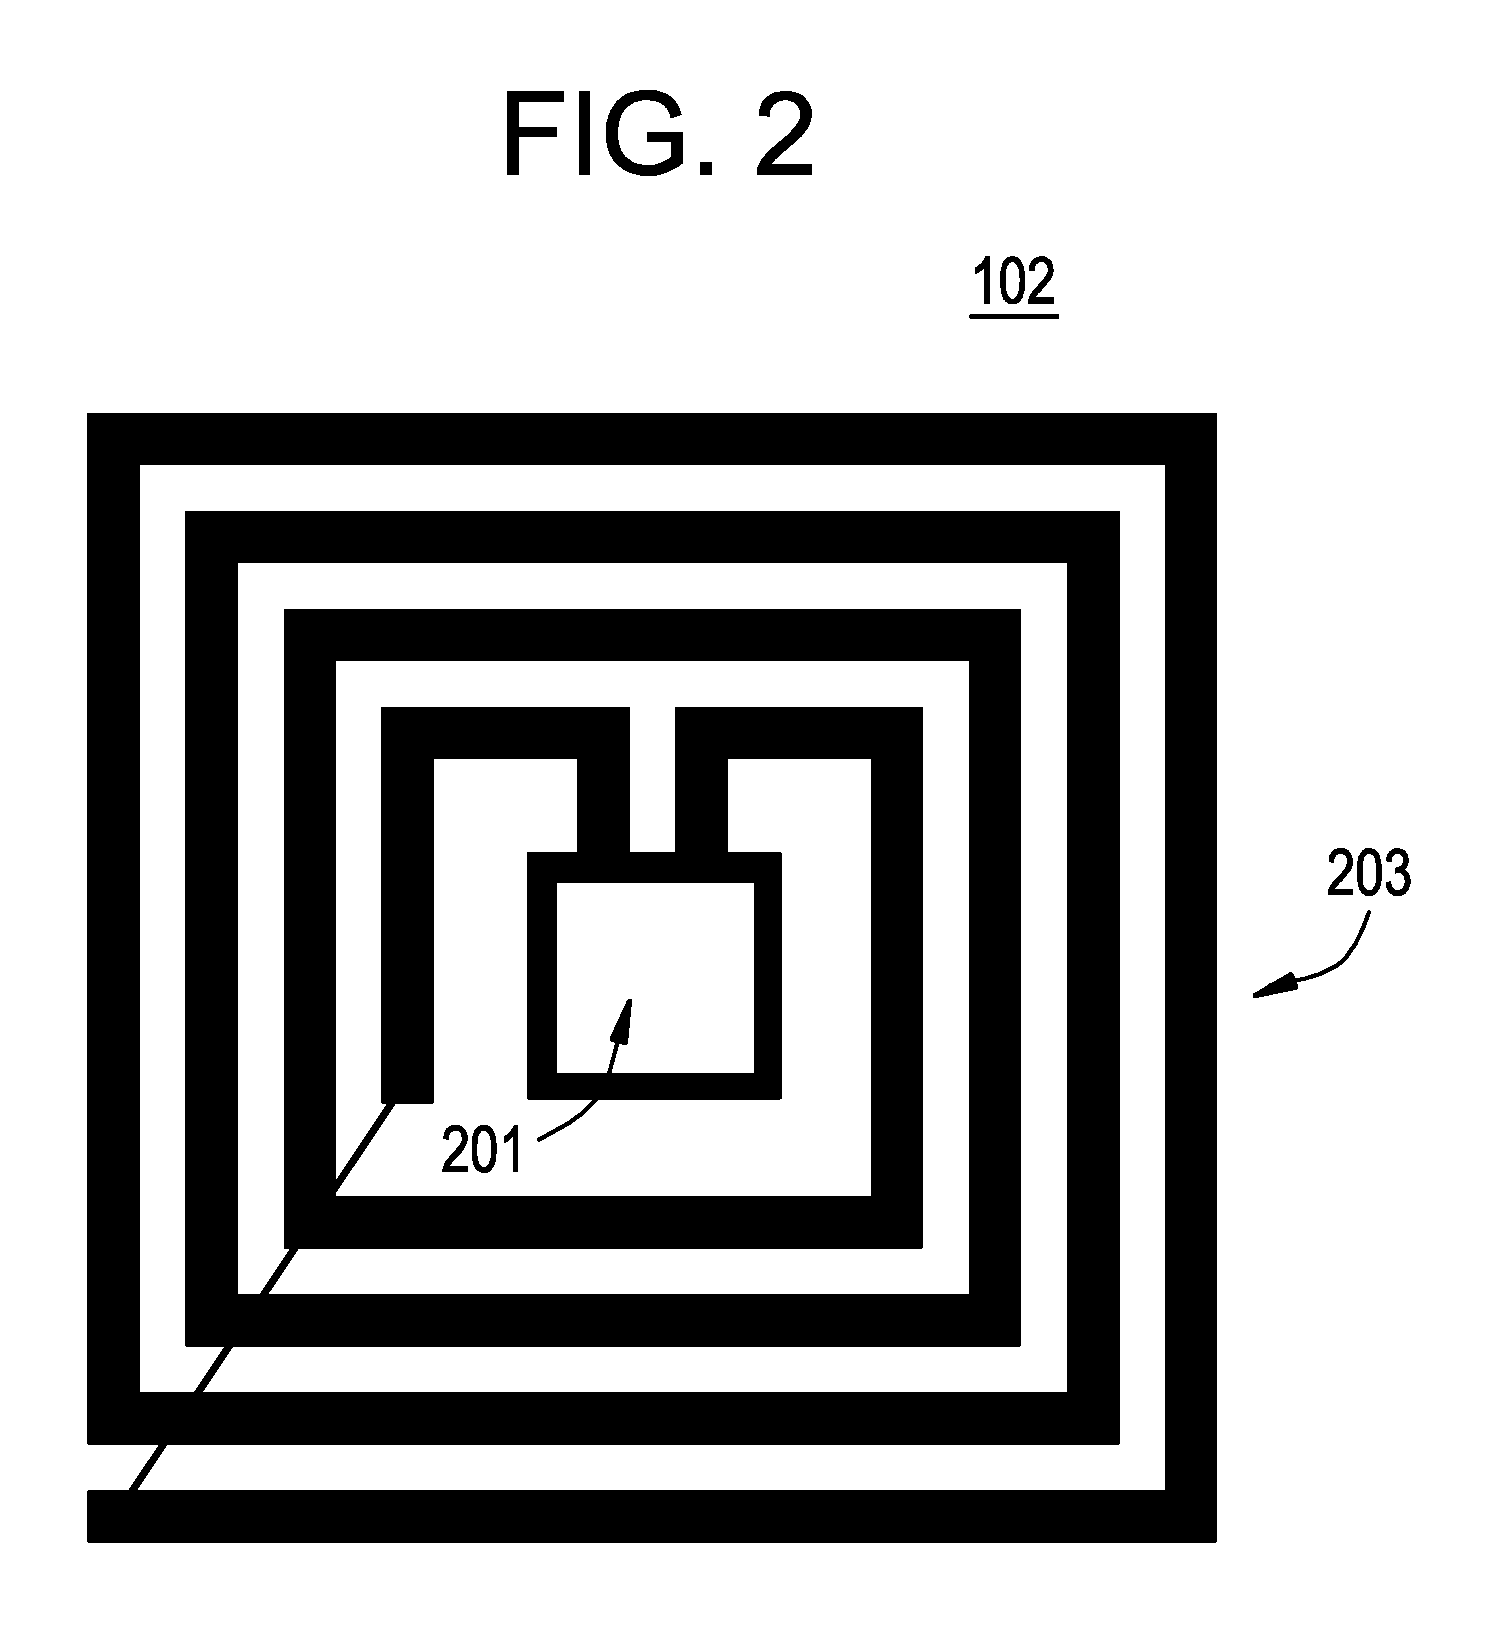 Method for preventing an unauthorized use of disposable bioprocess components